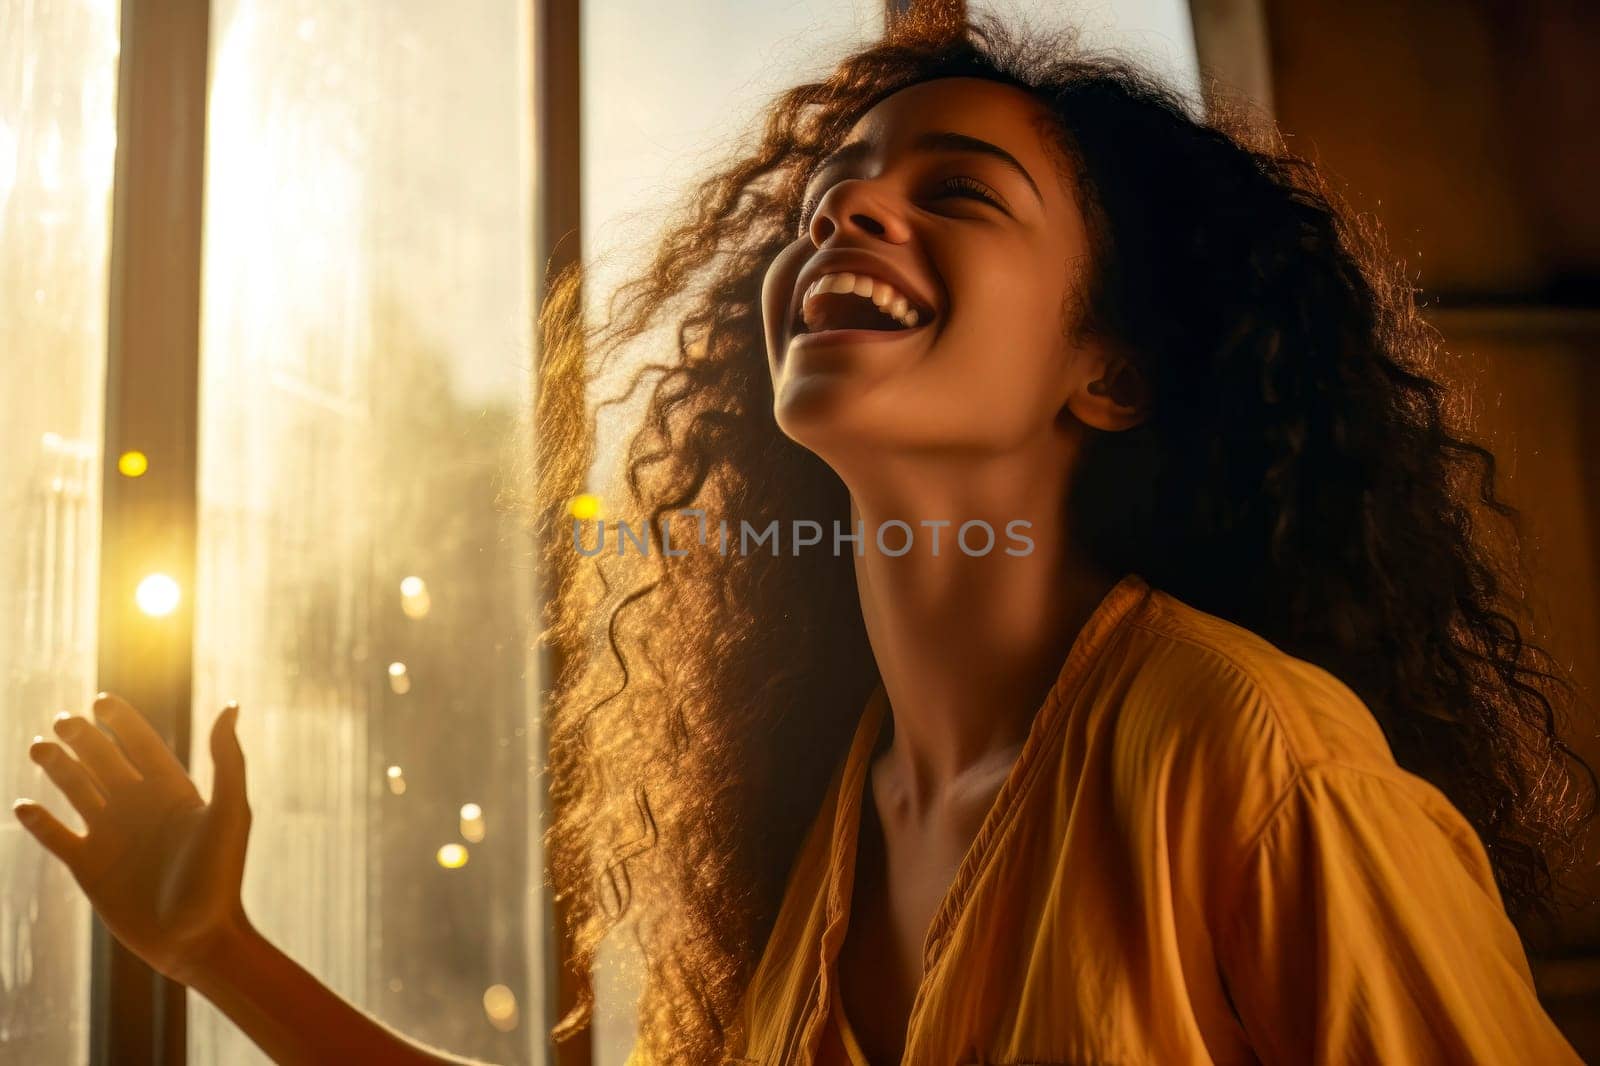 A photo portraying a smiling girl with a substance, symbolizing the concept of drugs.